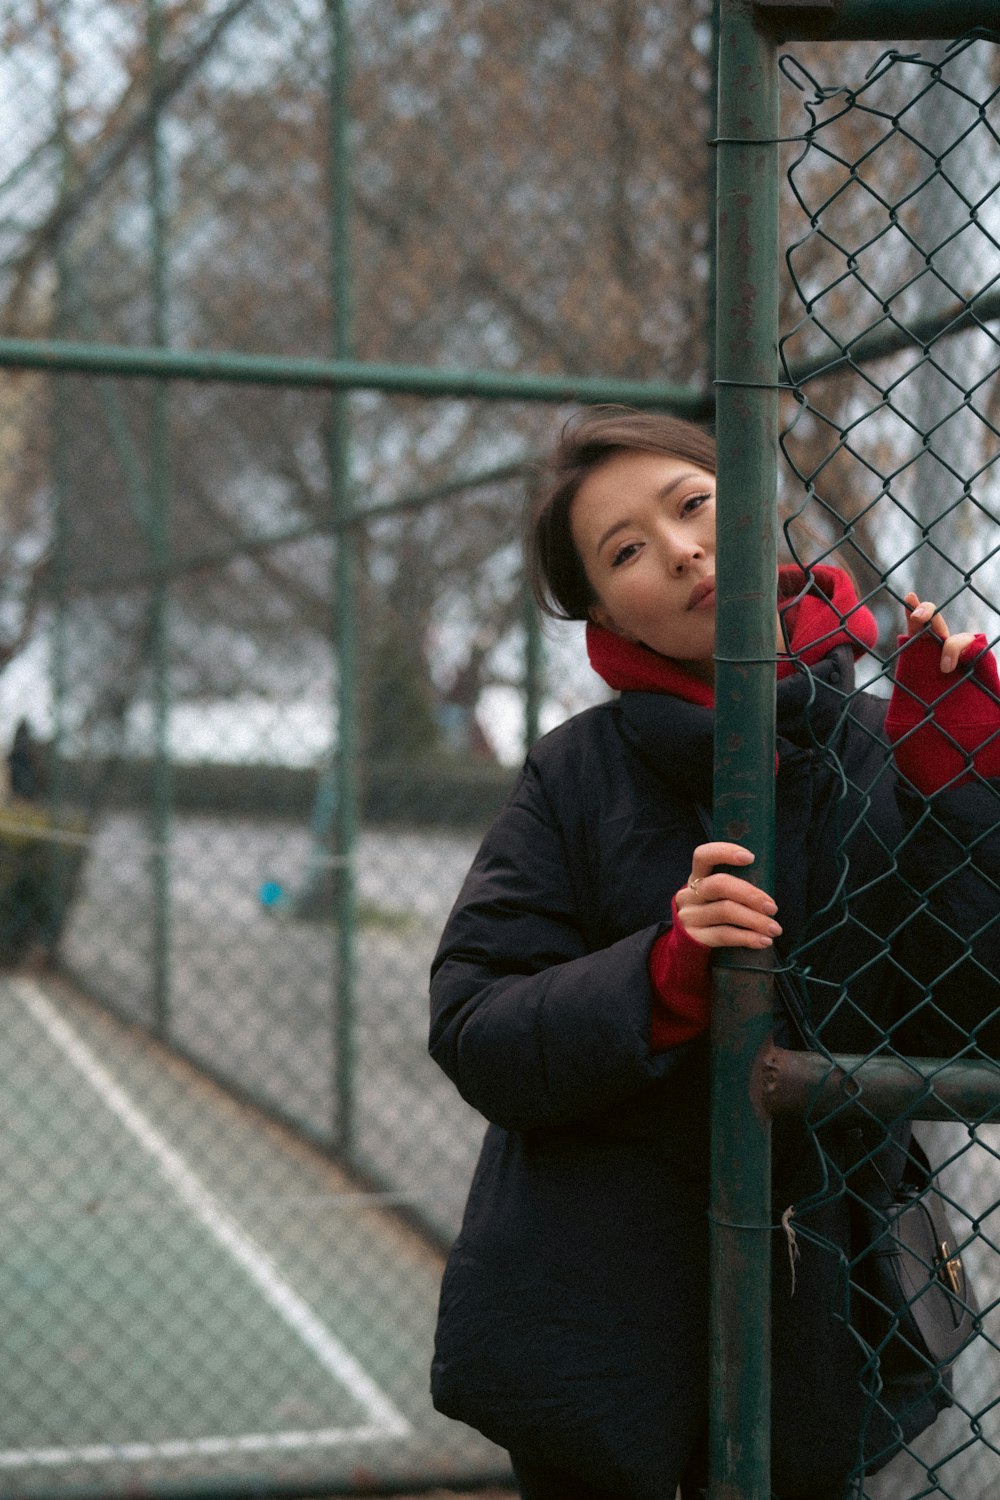 a woman leaning against a fence with a tennis racket